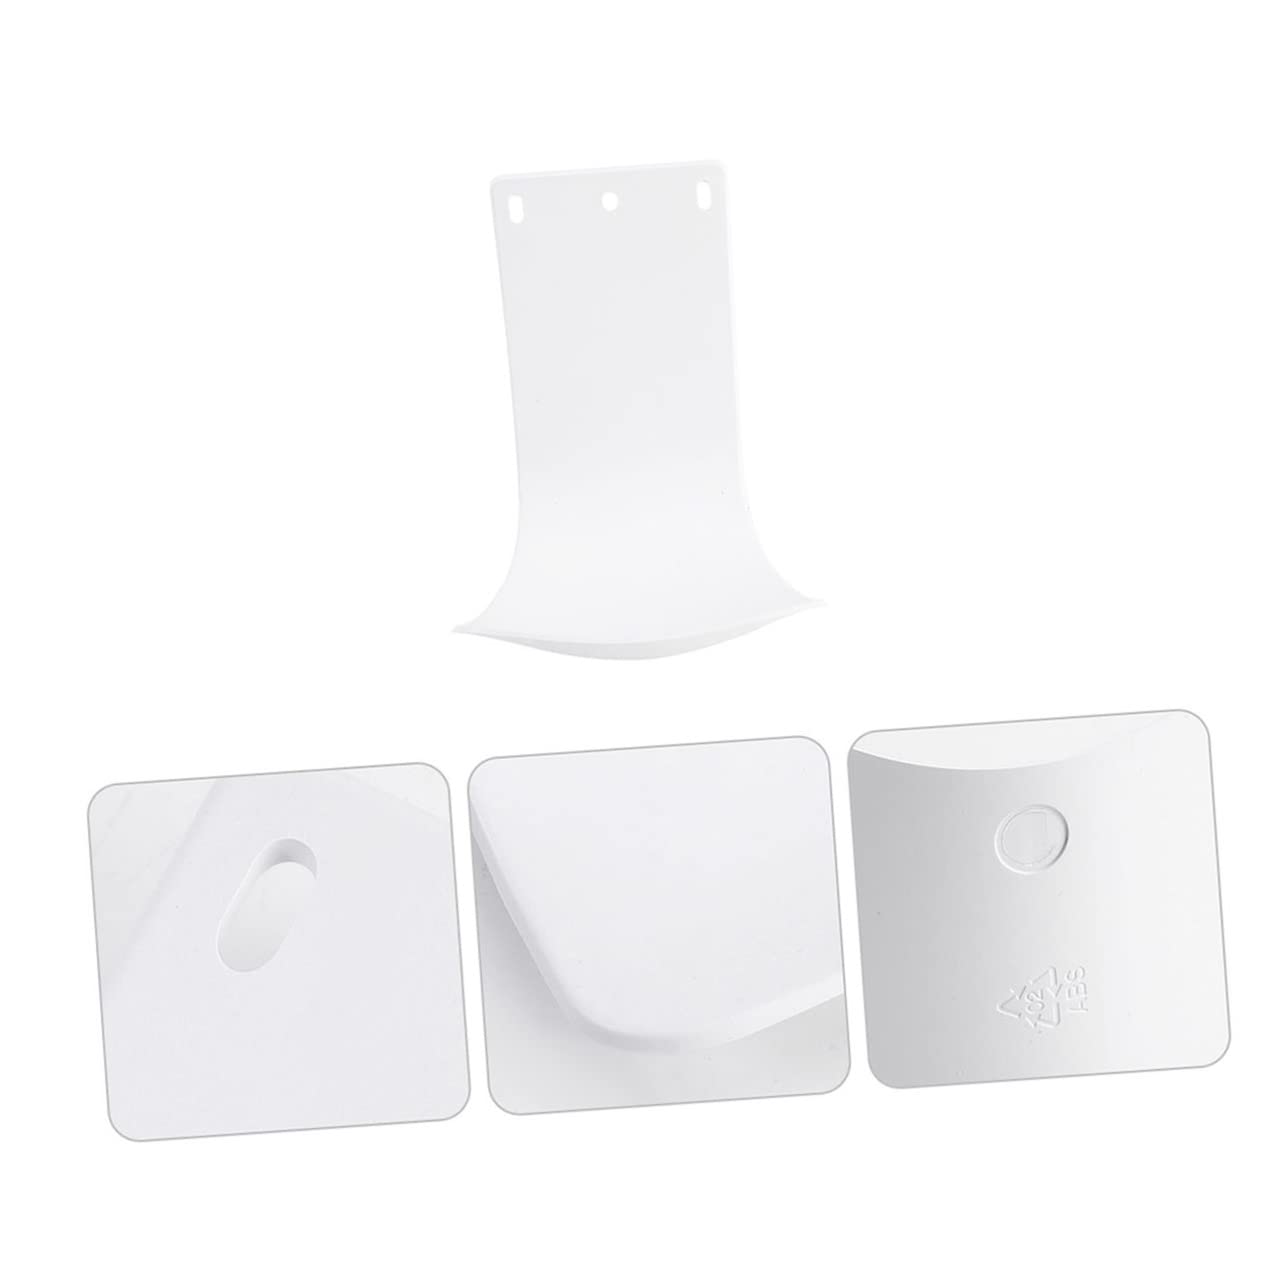 Mobestech 2pcs Plastic Water Tray Automatic Dispenser Trays Foam Soap Dispenser Tray Washer Pan Tray Soap Dispenser Bracket Soap Dispenser Wall Mount Drip Tray White Abs Household Decorate